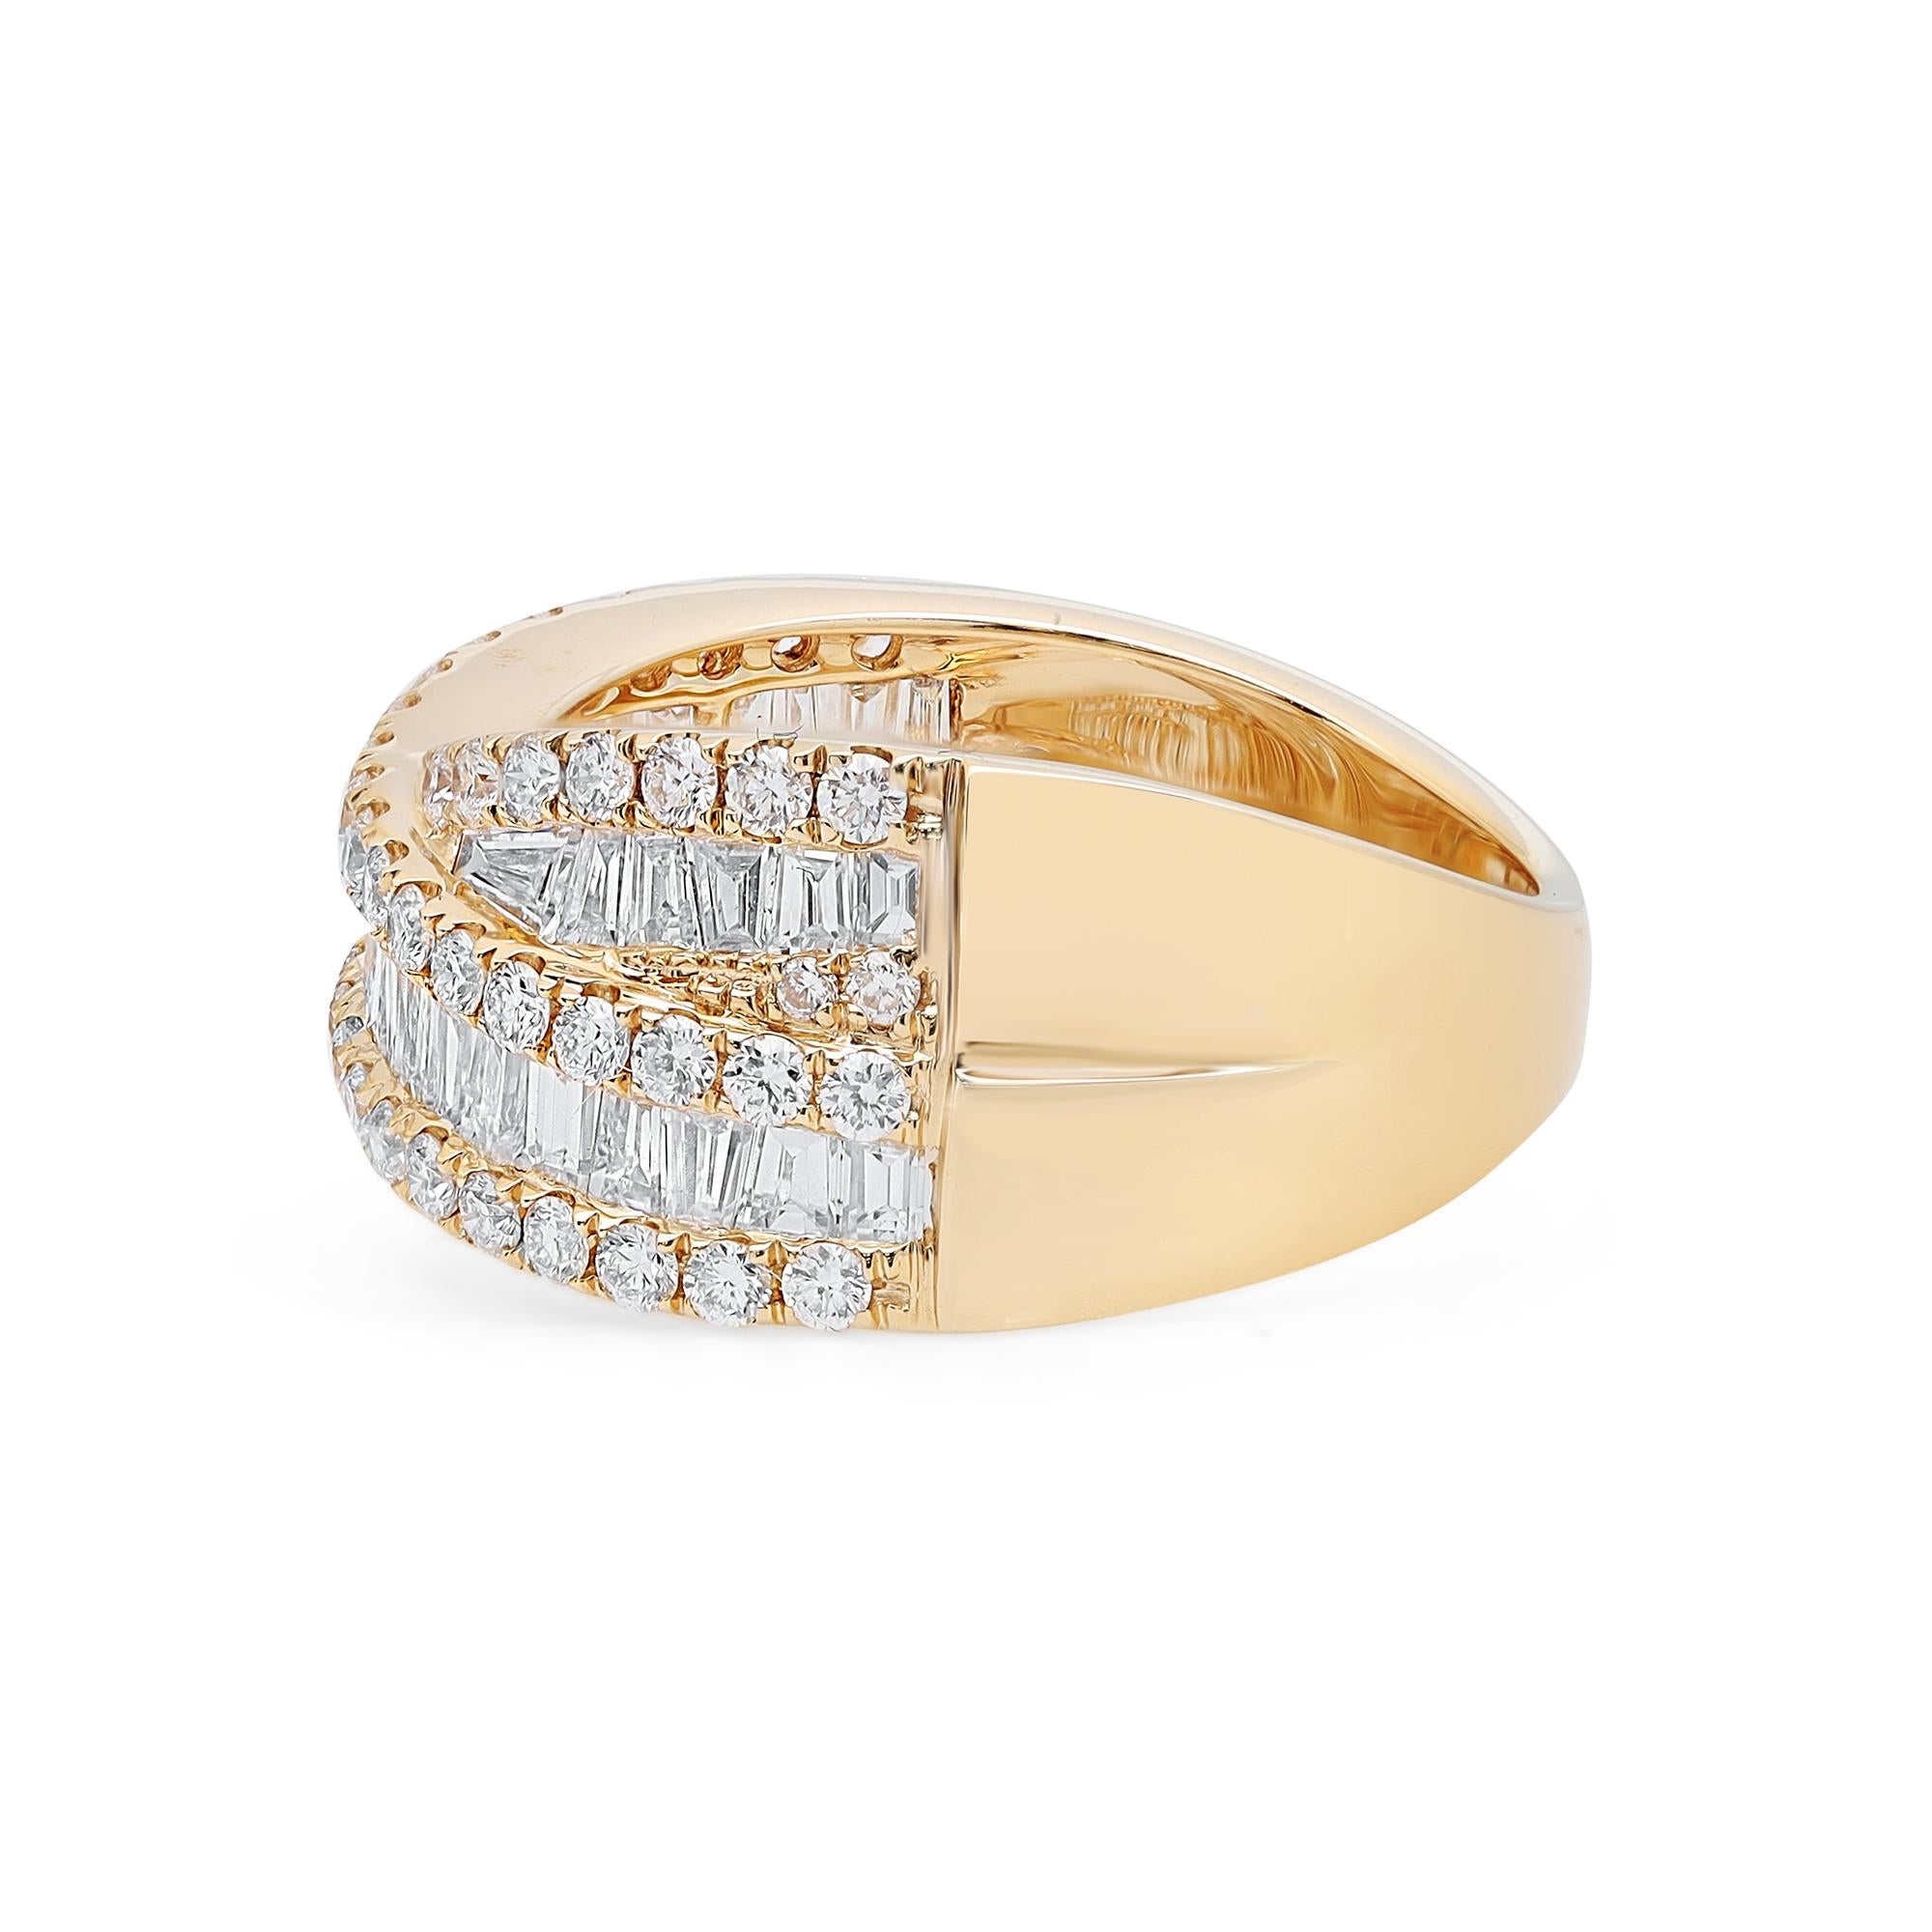 Rachel Koen 1.97Cttw Baguette & Round Diamond Ring 18K Yellow Gold In New Condition For Sale In New York, NY